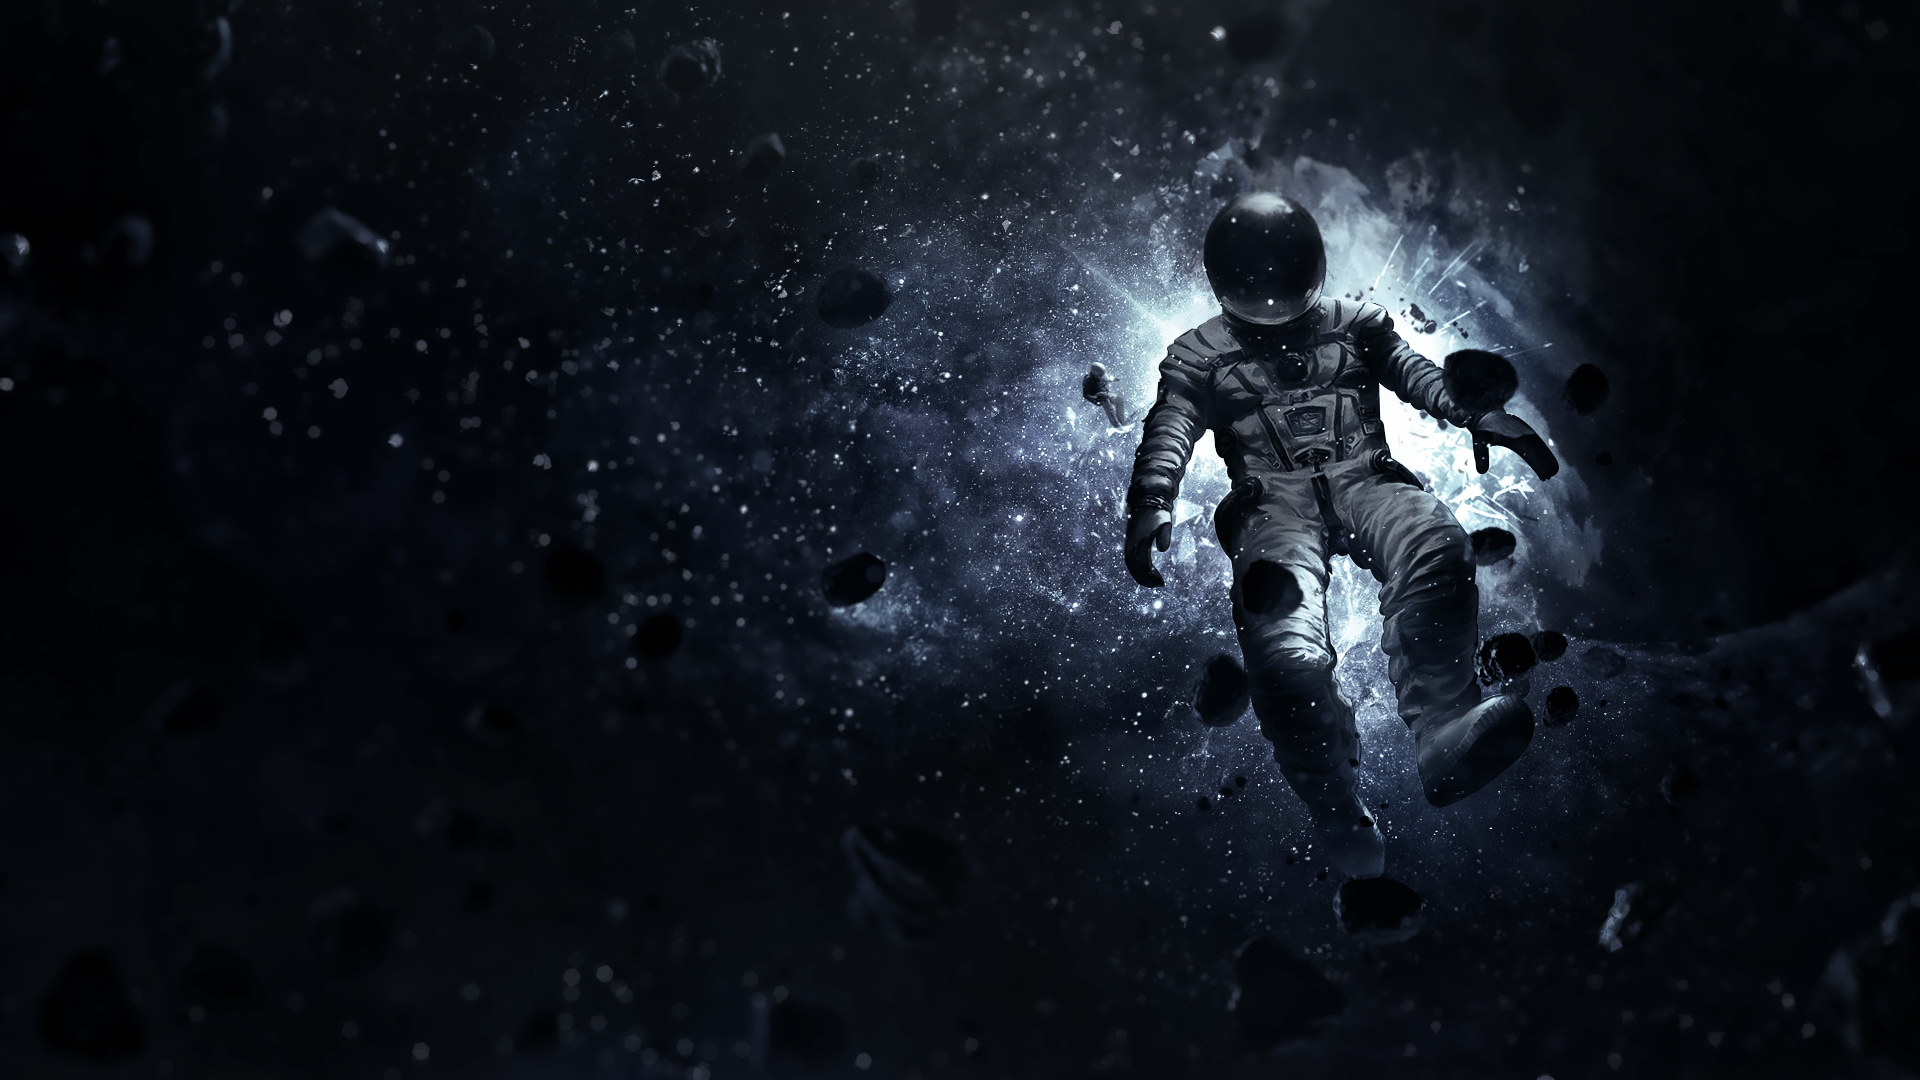 Astronaut lost in space wallpapers and images - wallpapers, pictures